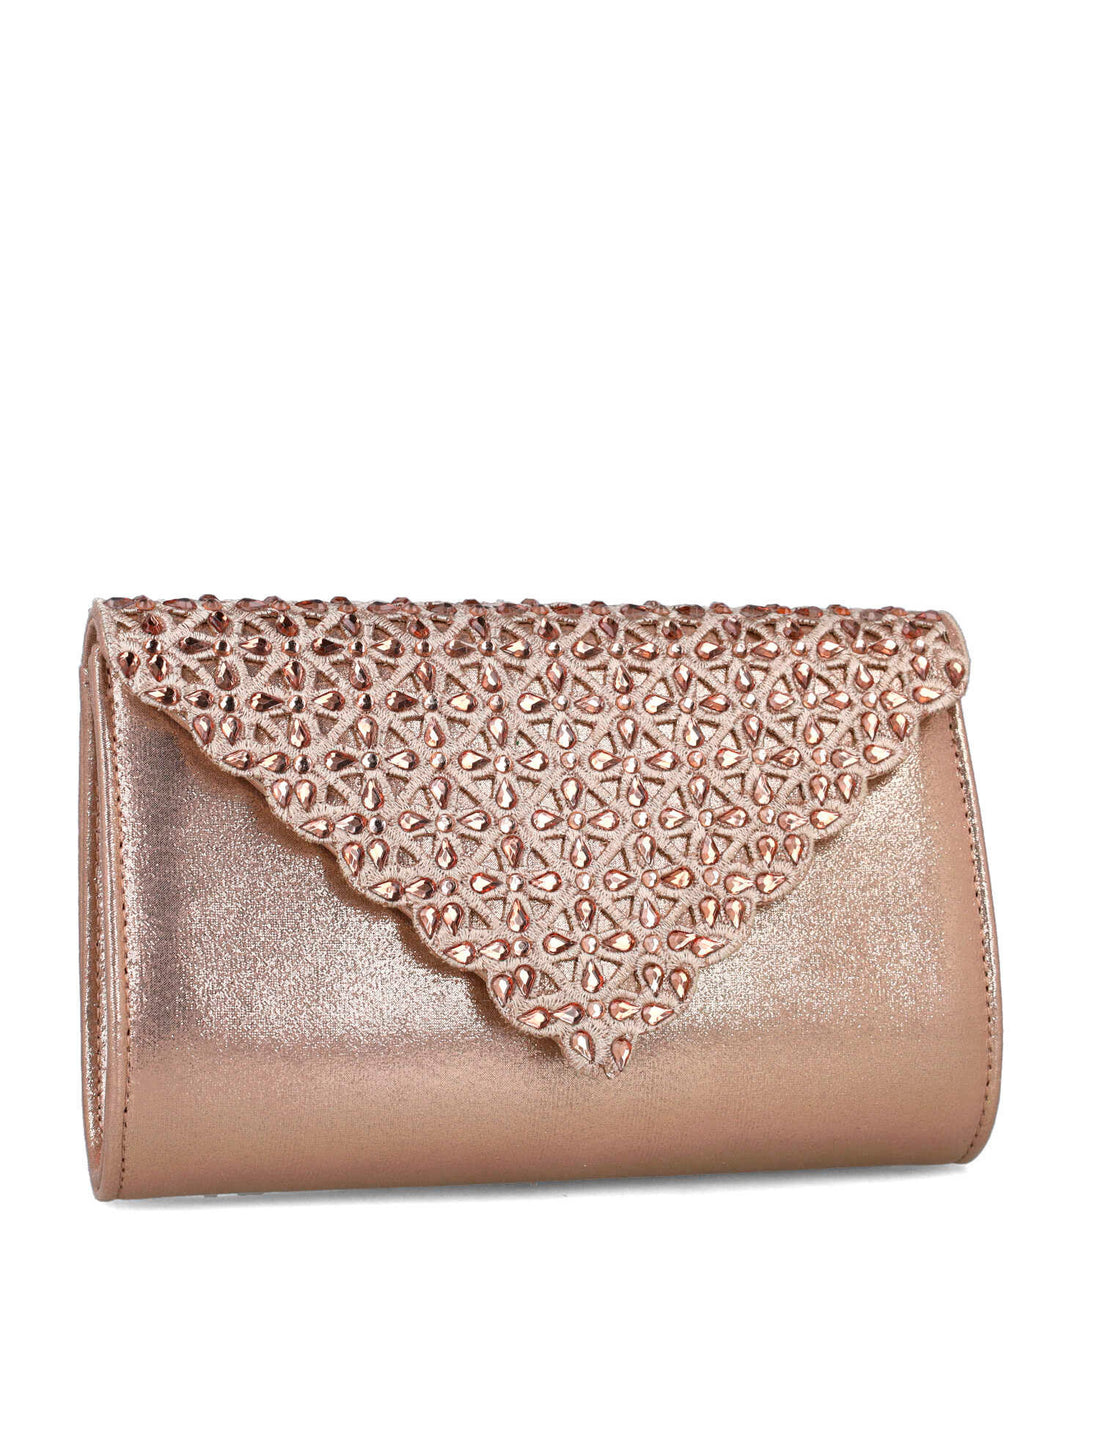 Gold Clutch With Embellished Flap_85540_38_02